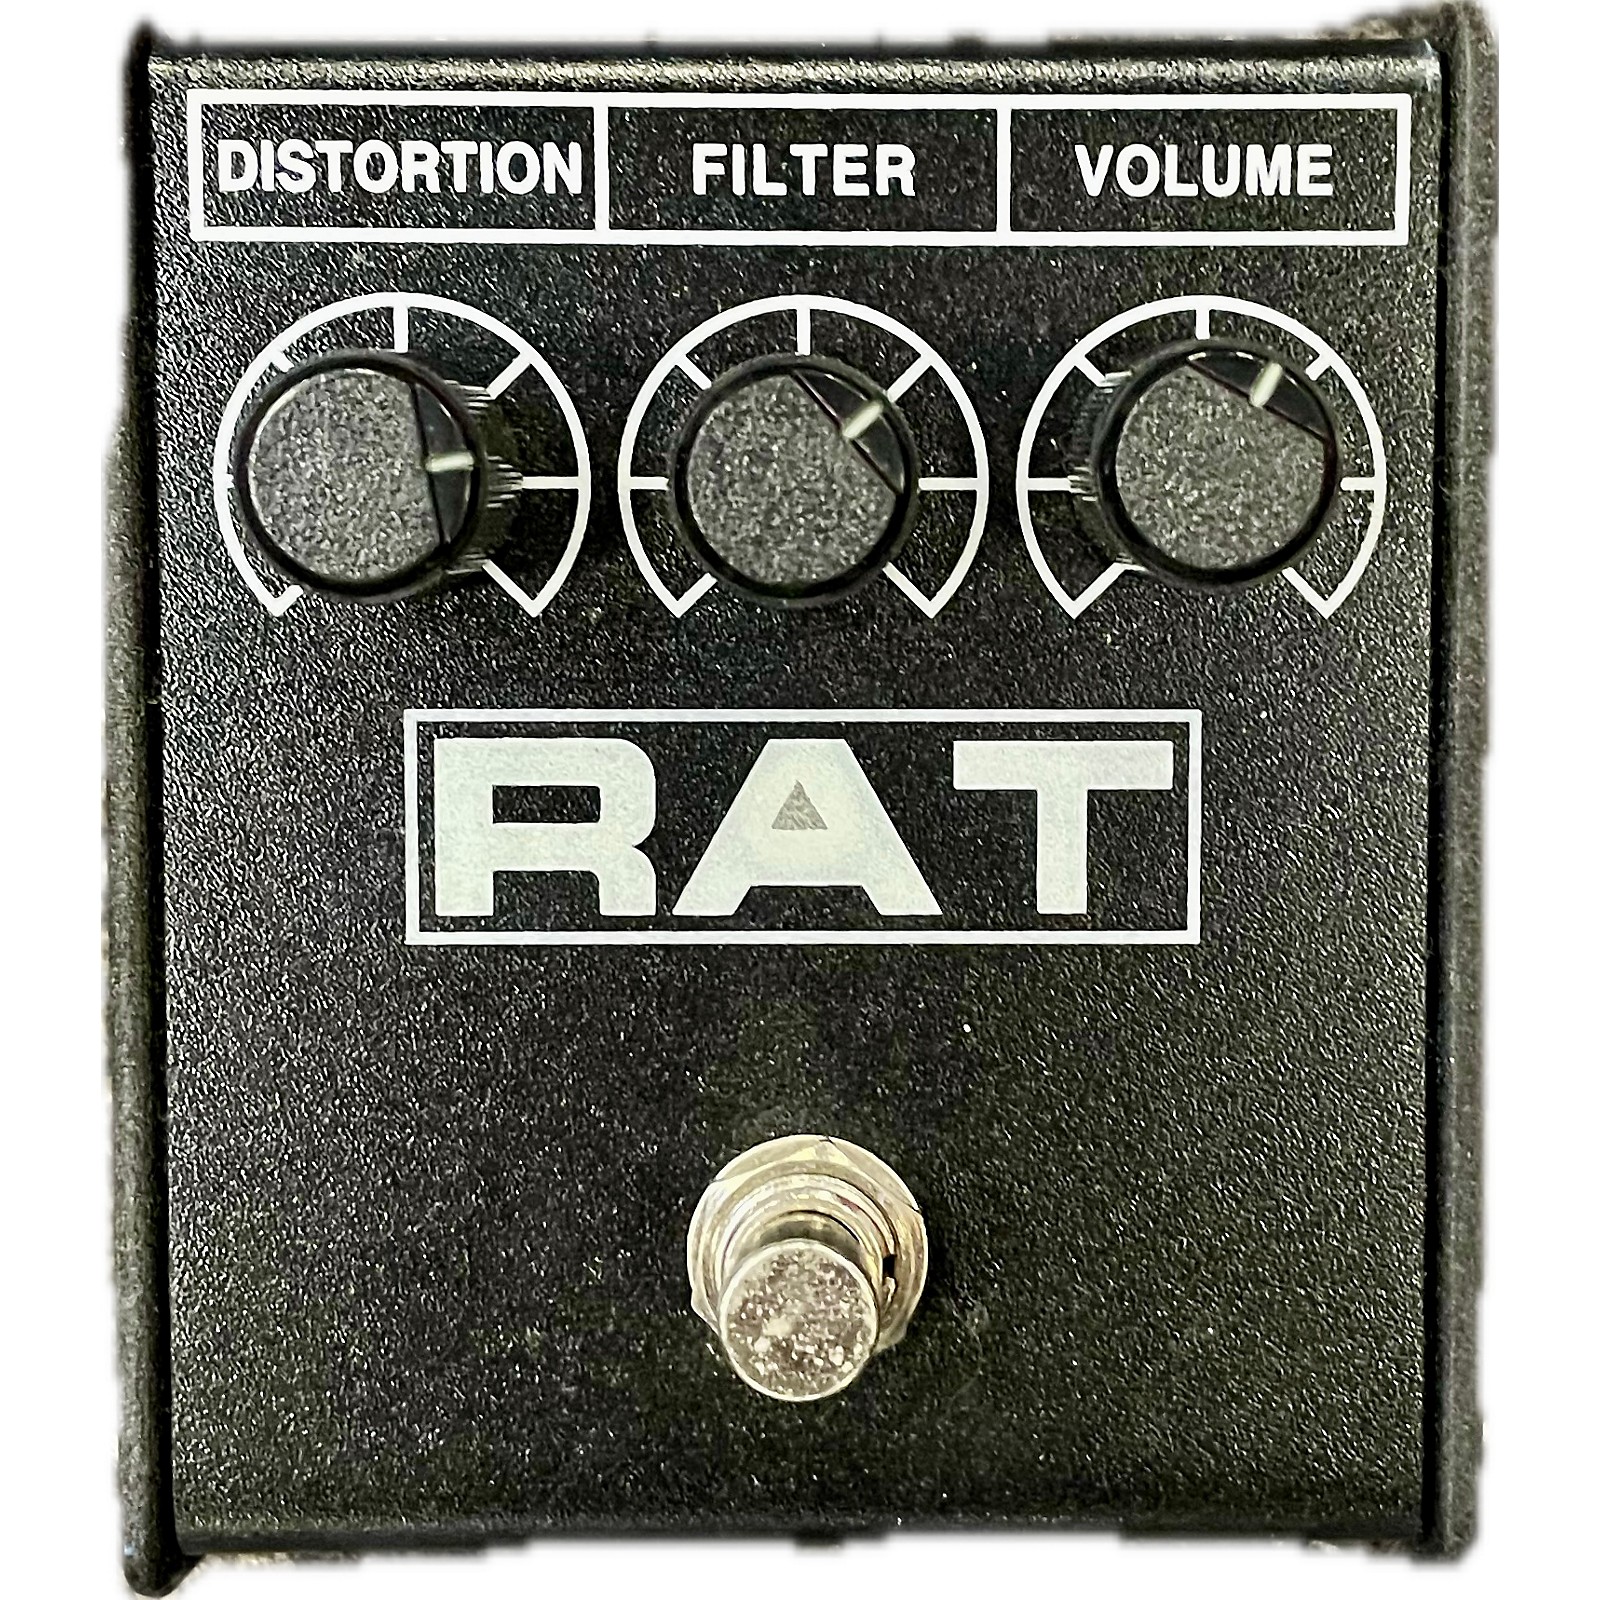 Used ProCo Rat II Distortion Effect Pedal | Guitar Center